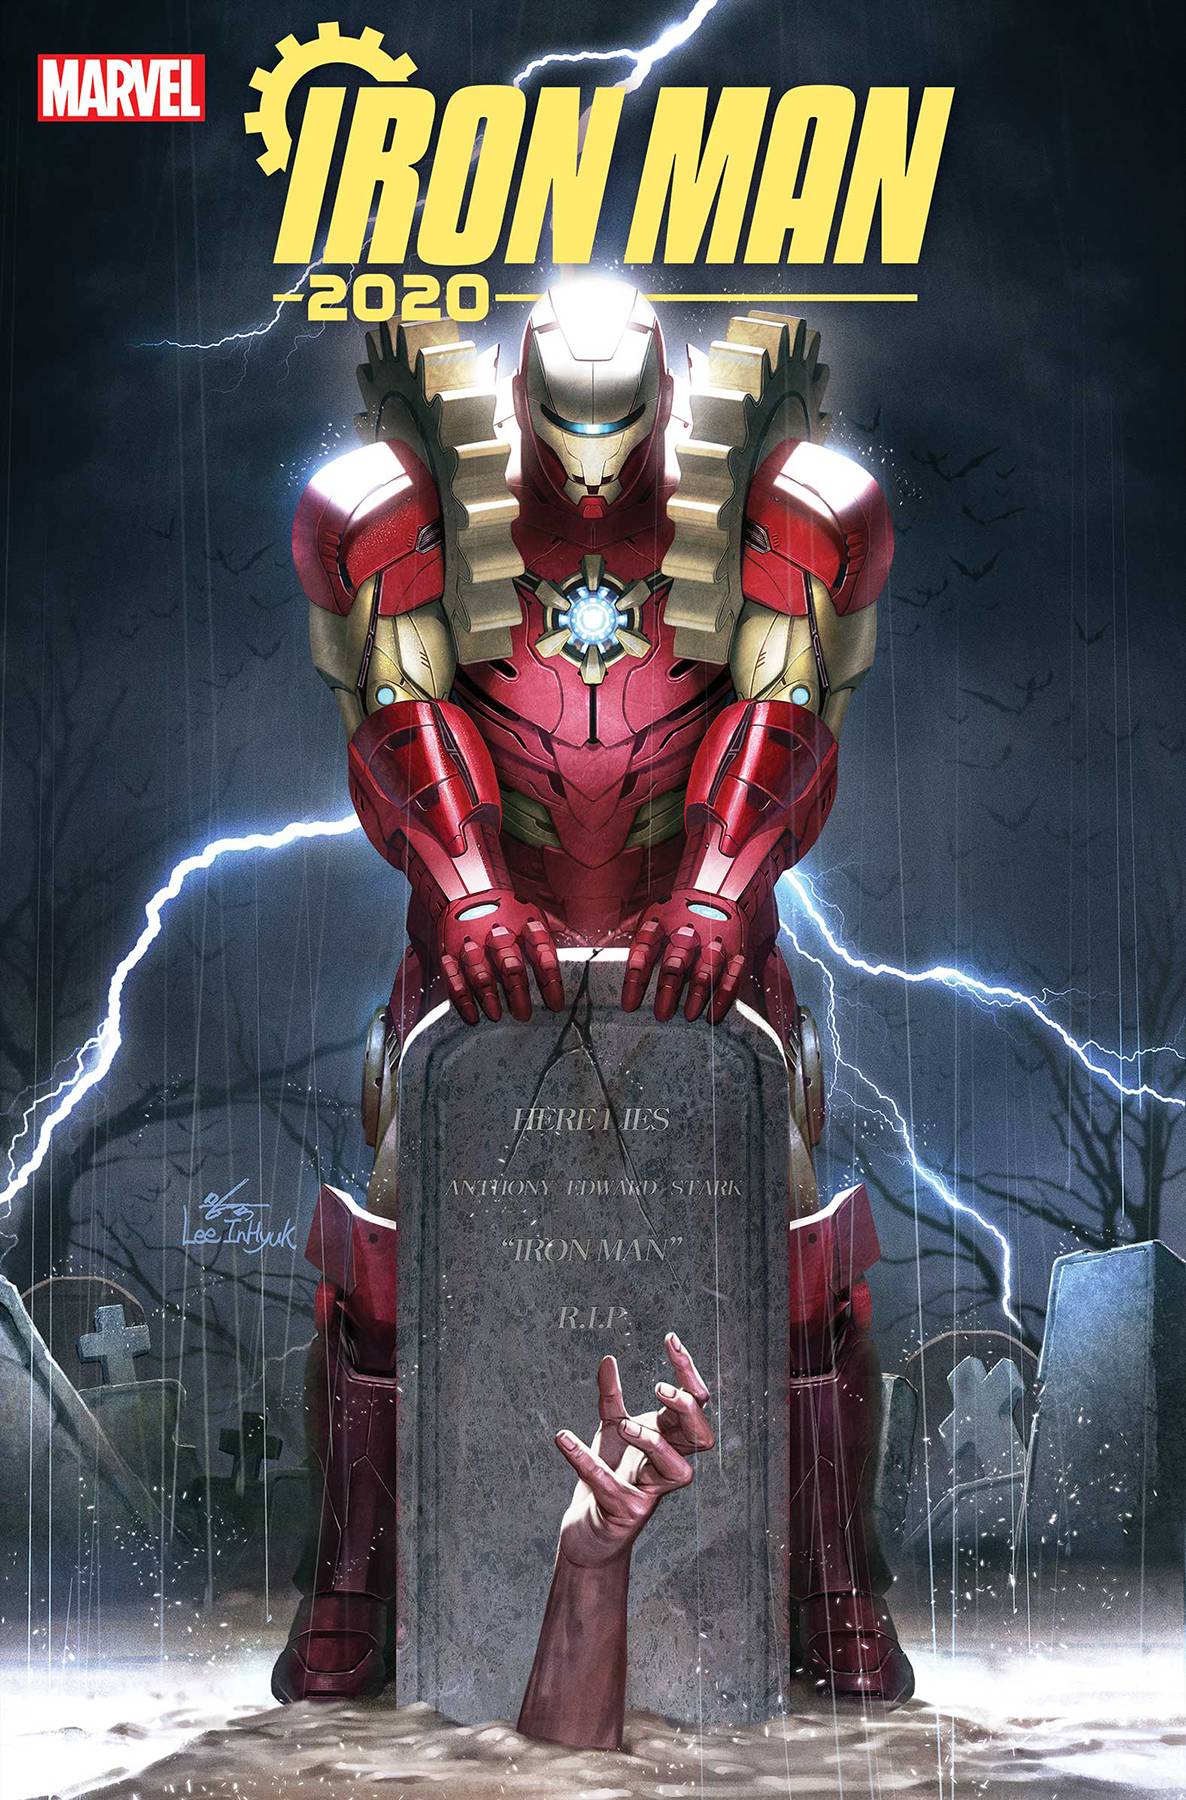 Iron Man 2020 #1 by Inhyuk Lee Poster